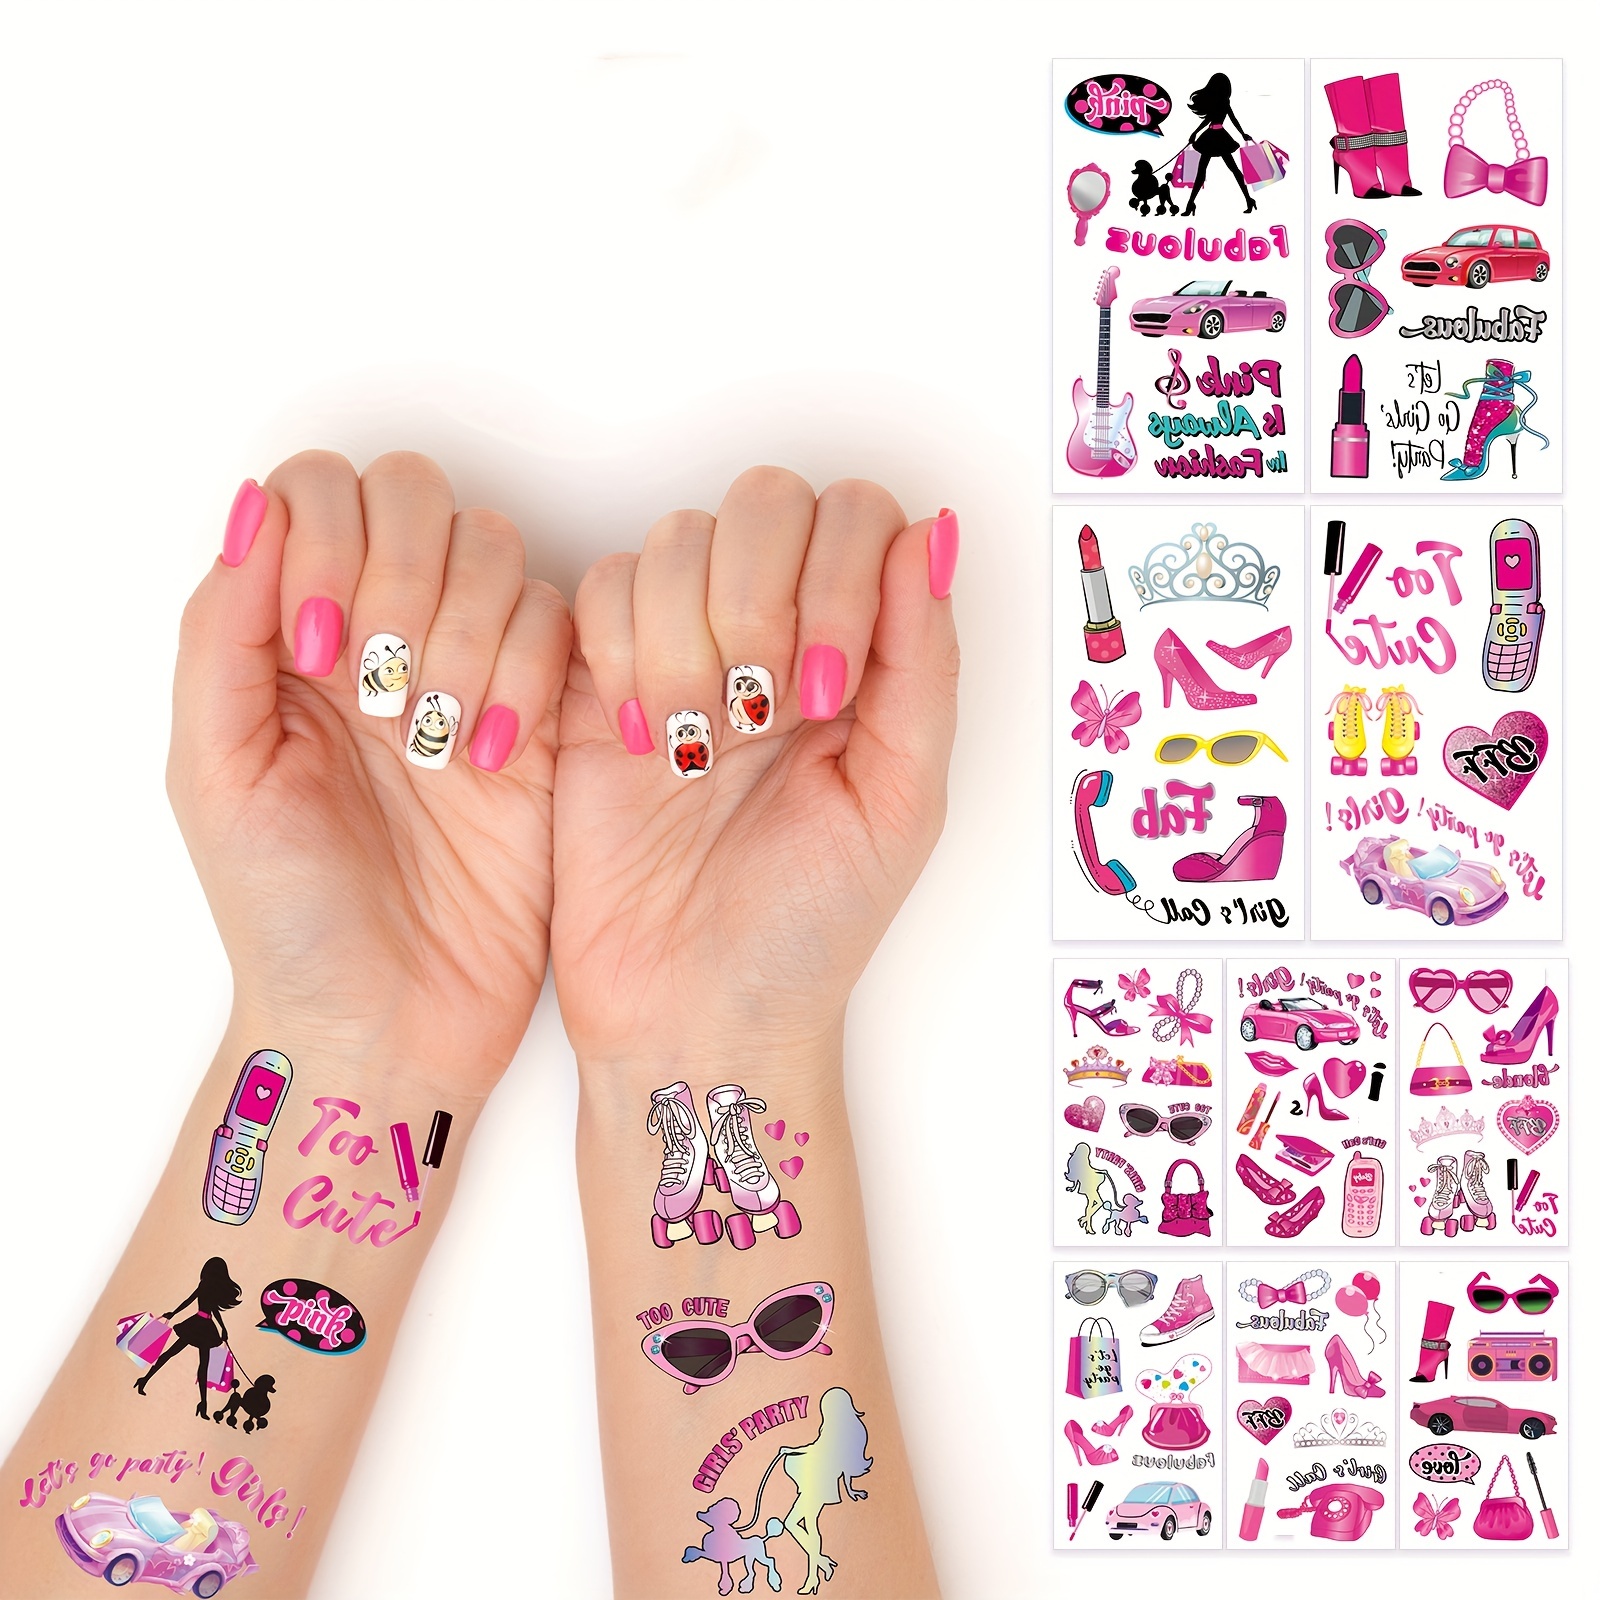 

10pcs Pink Girls Party Theme Series Tattoo Stickers, Waterproof And Sweatproof Lasting 3-6 Days Sweet Body Art For Girls